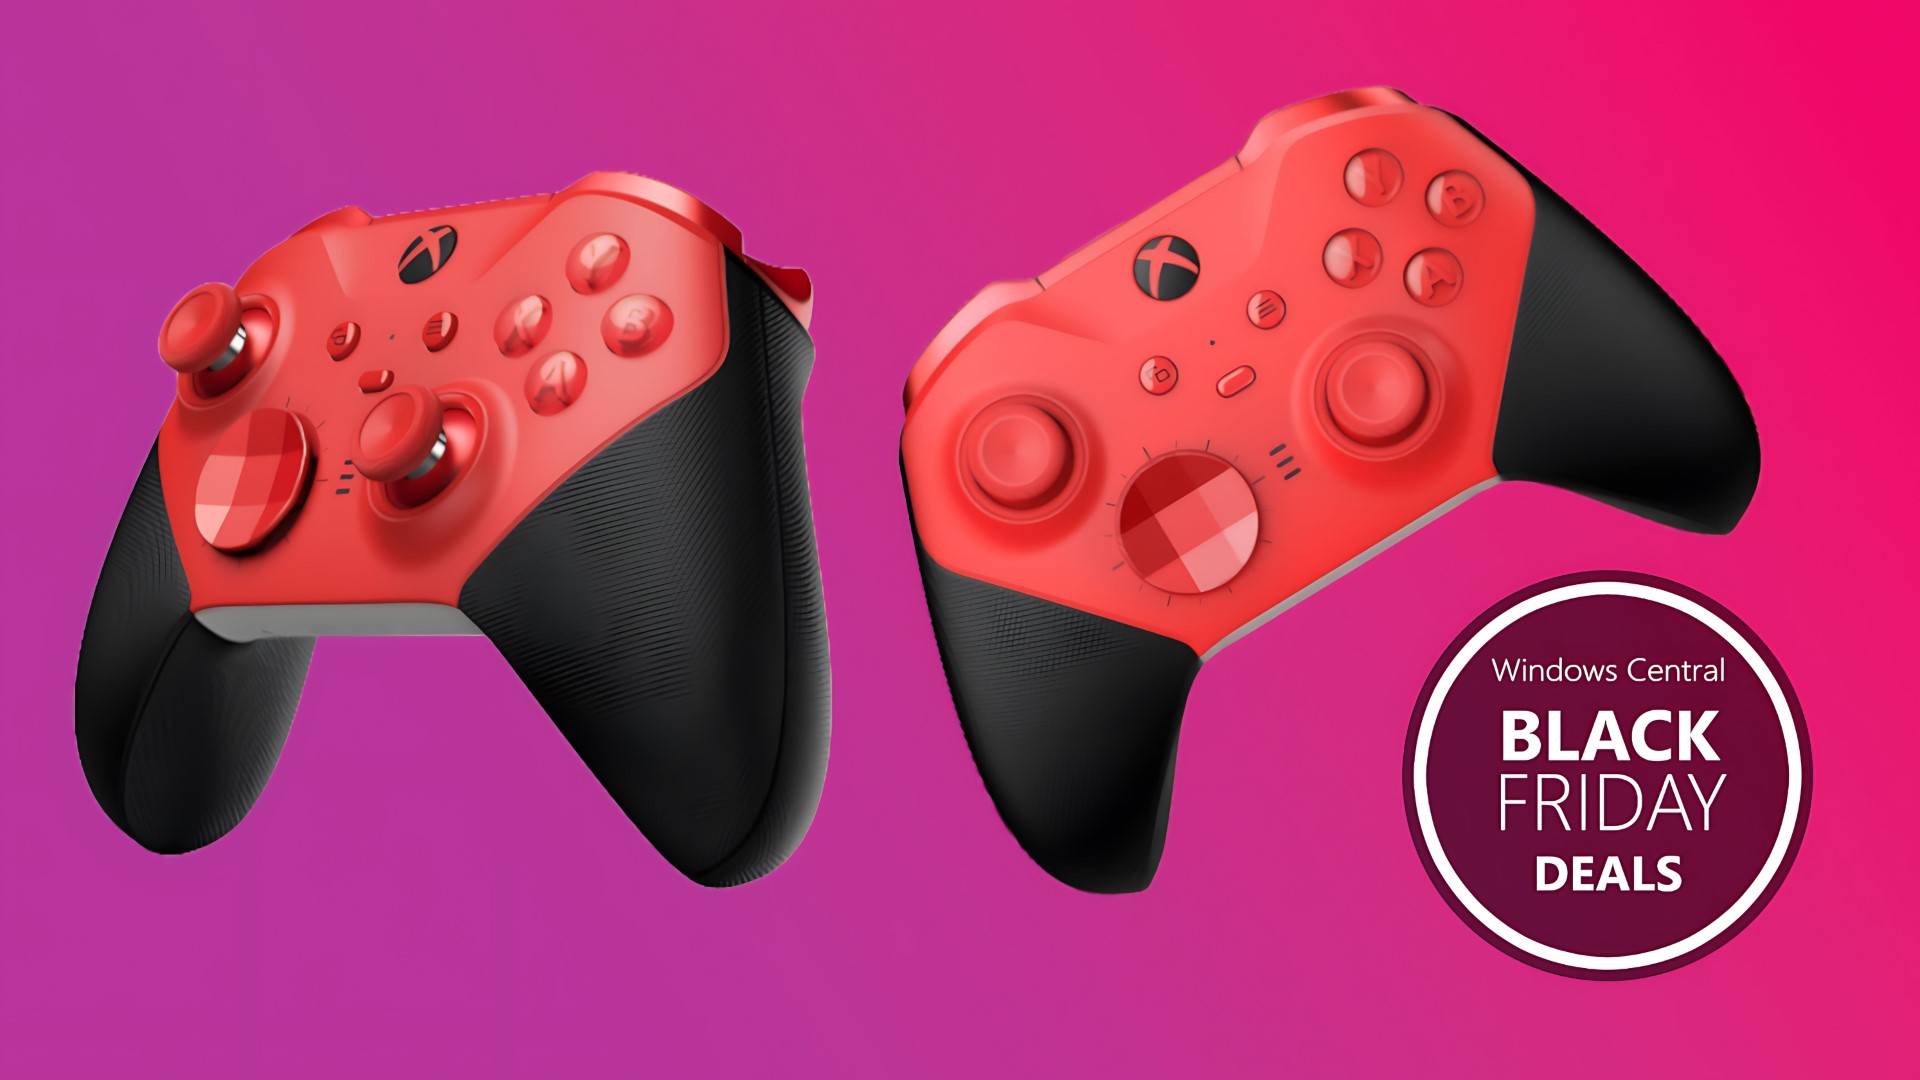 Get 30% Off the Xbox Elite Series 2 Core Wireless Controller in Red/Black  at Walmart - IGN